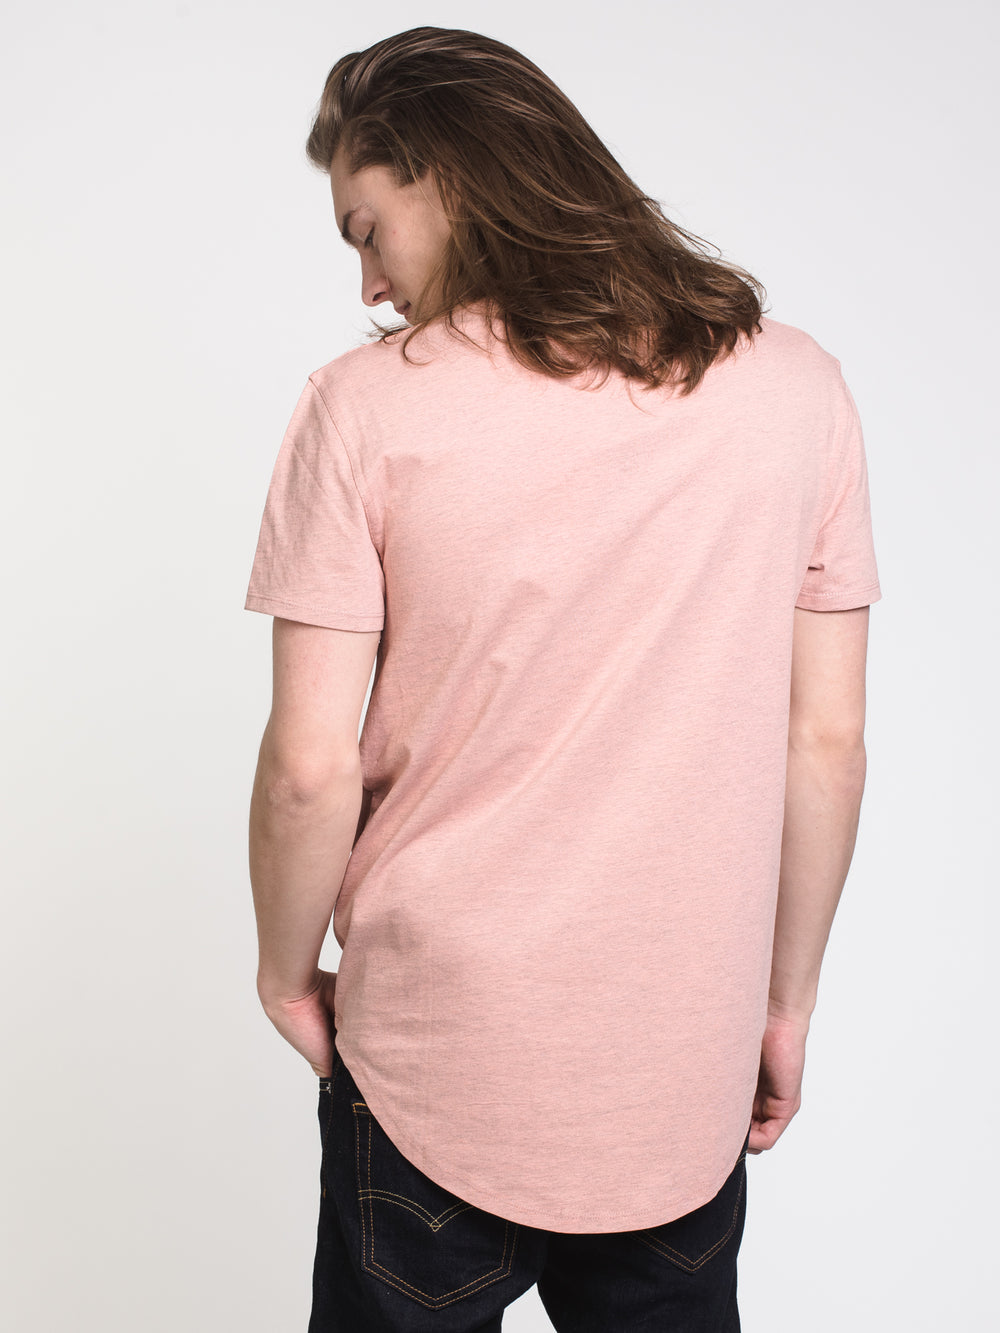 MENS LONGLINE T - PINK - CLEARANCE